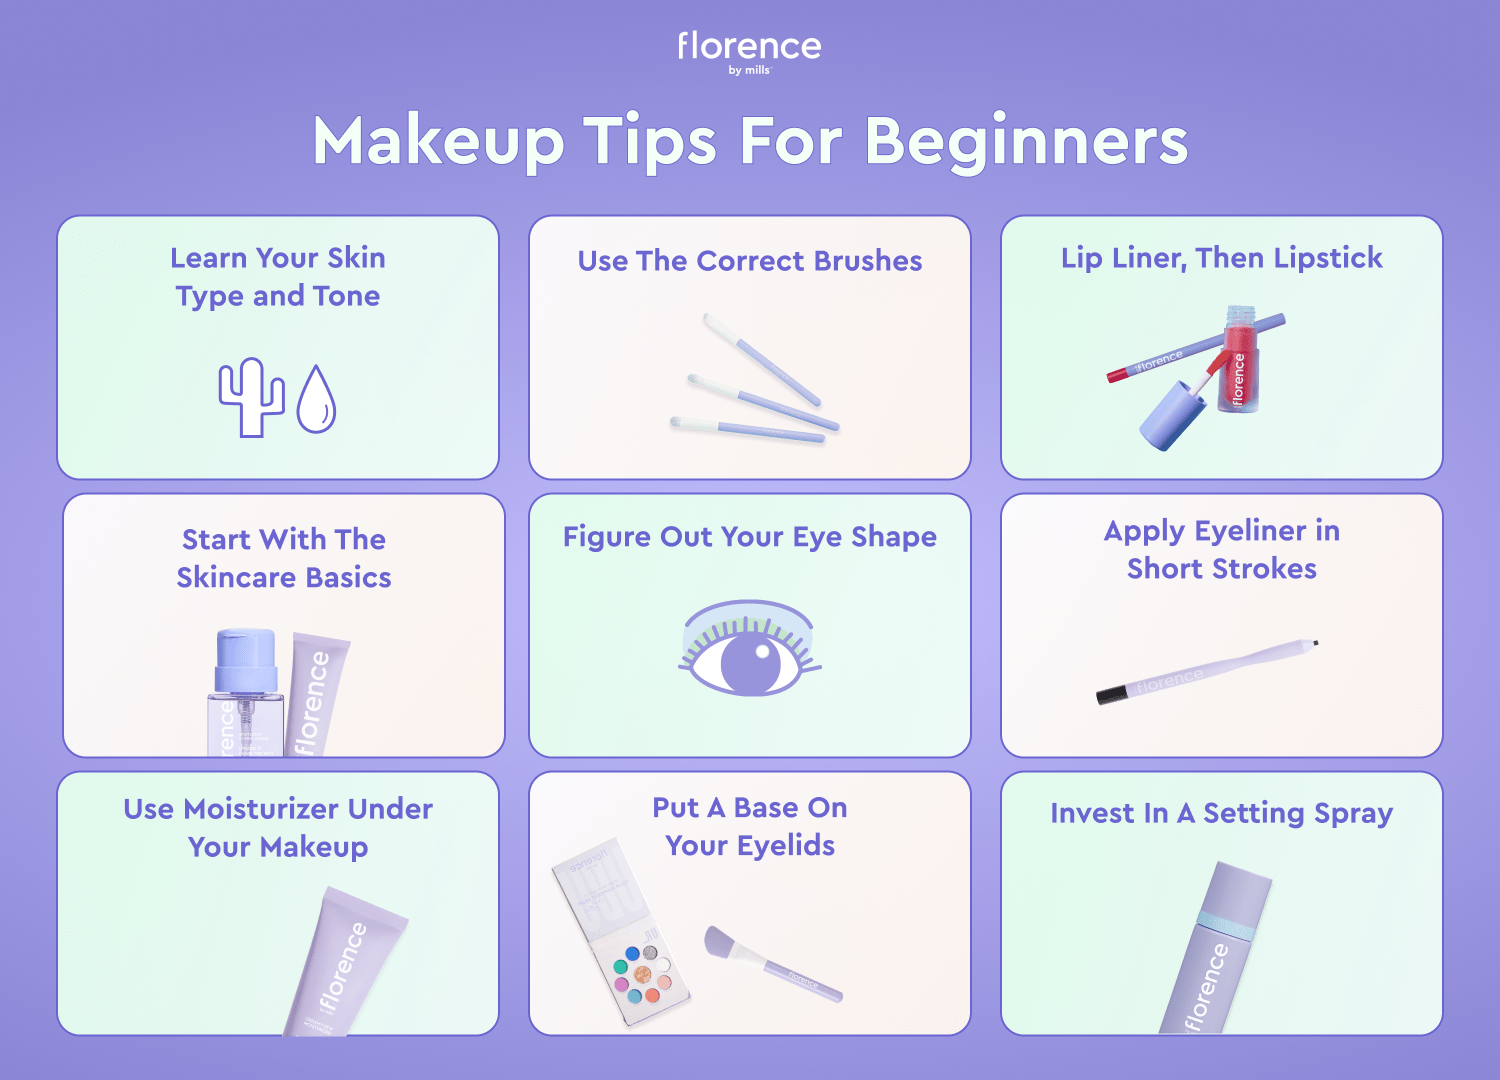 Makeup Tips for Beginners by florence by mills